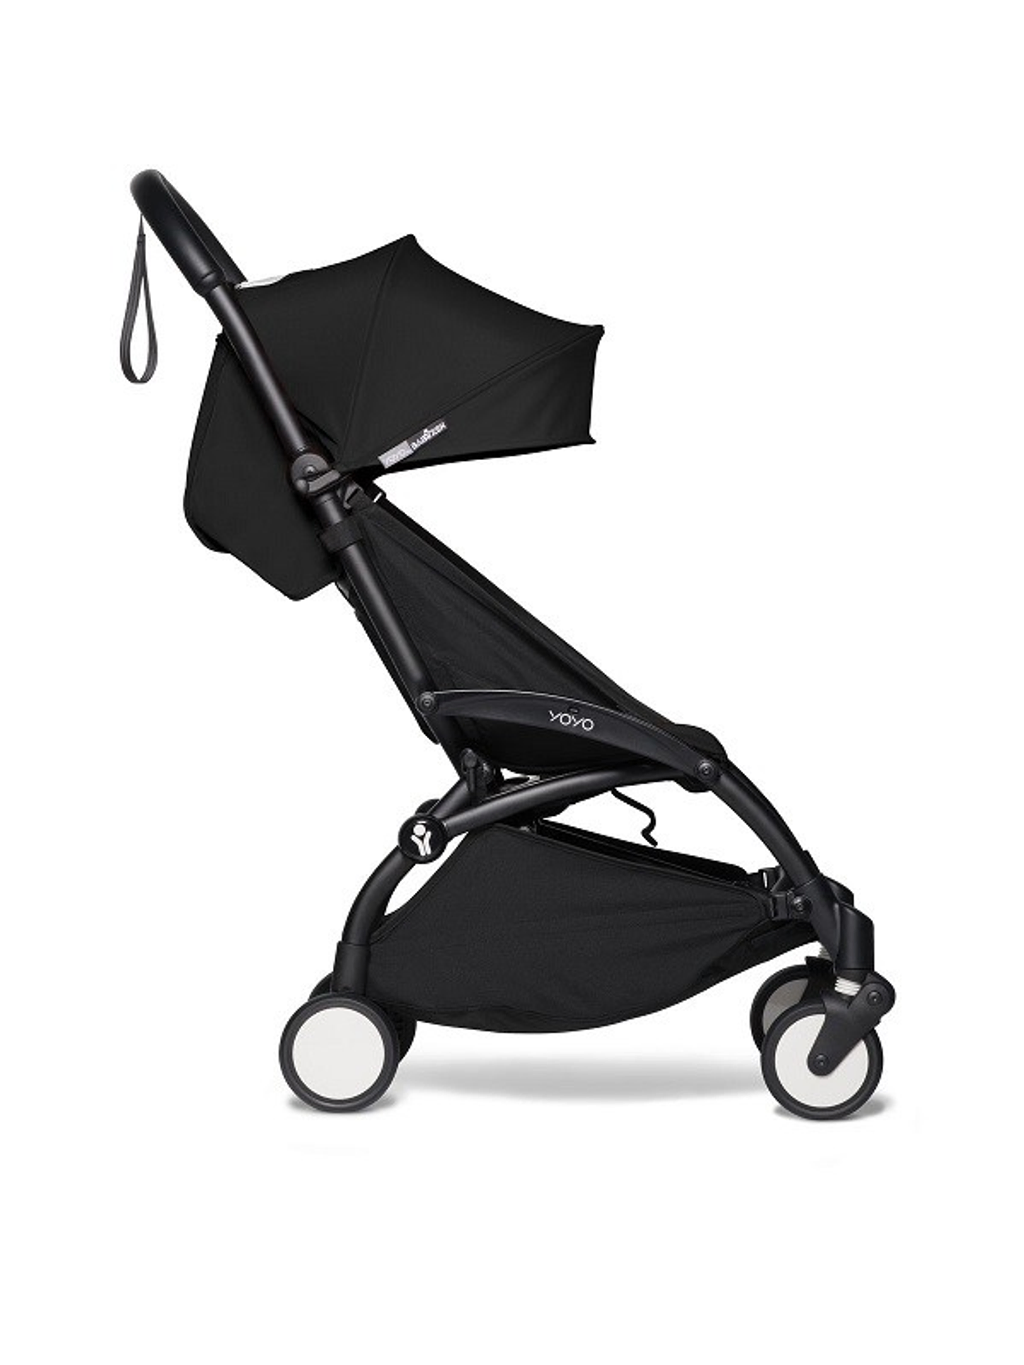 Rent the Babyzen Yoyo2 6+ stroller from BIYU - compact and convenient stroller for on-the-go adventures.